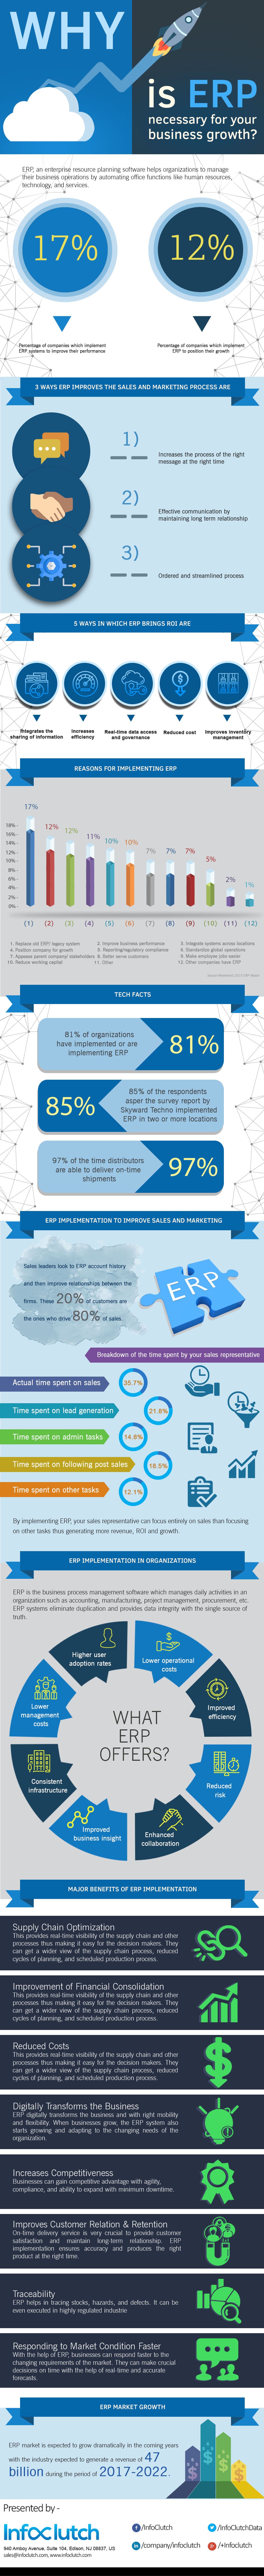 why ERP necessary for business growth